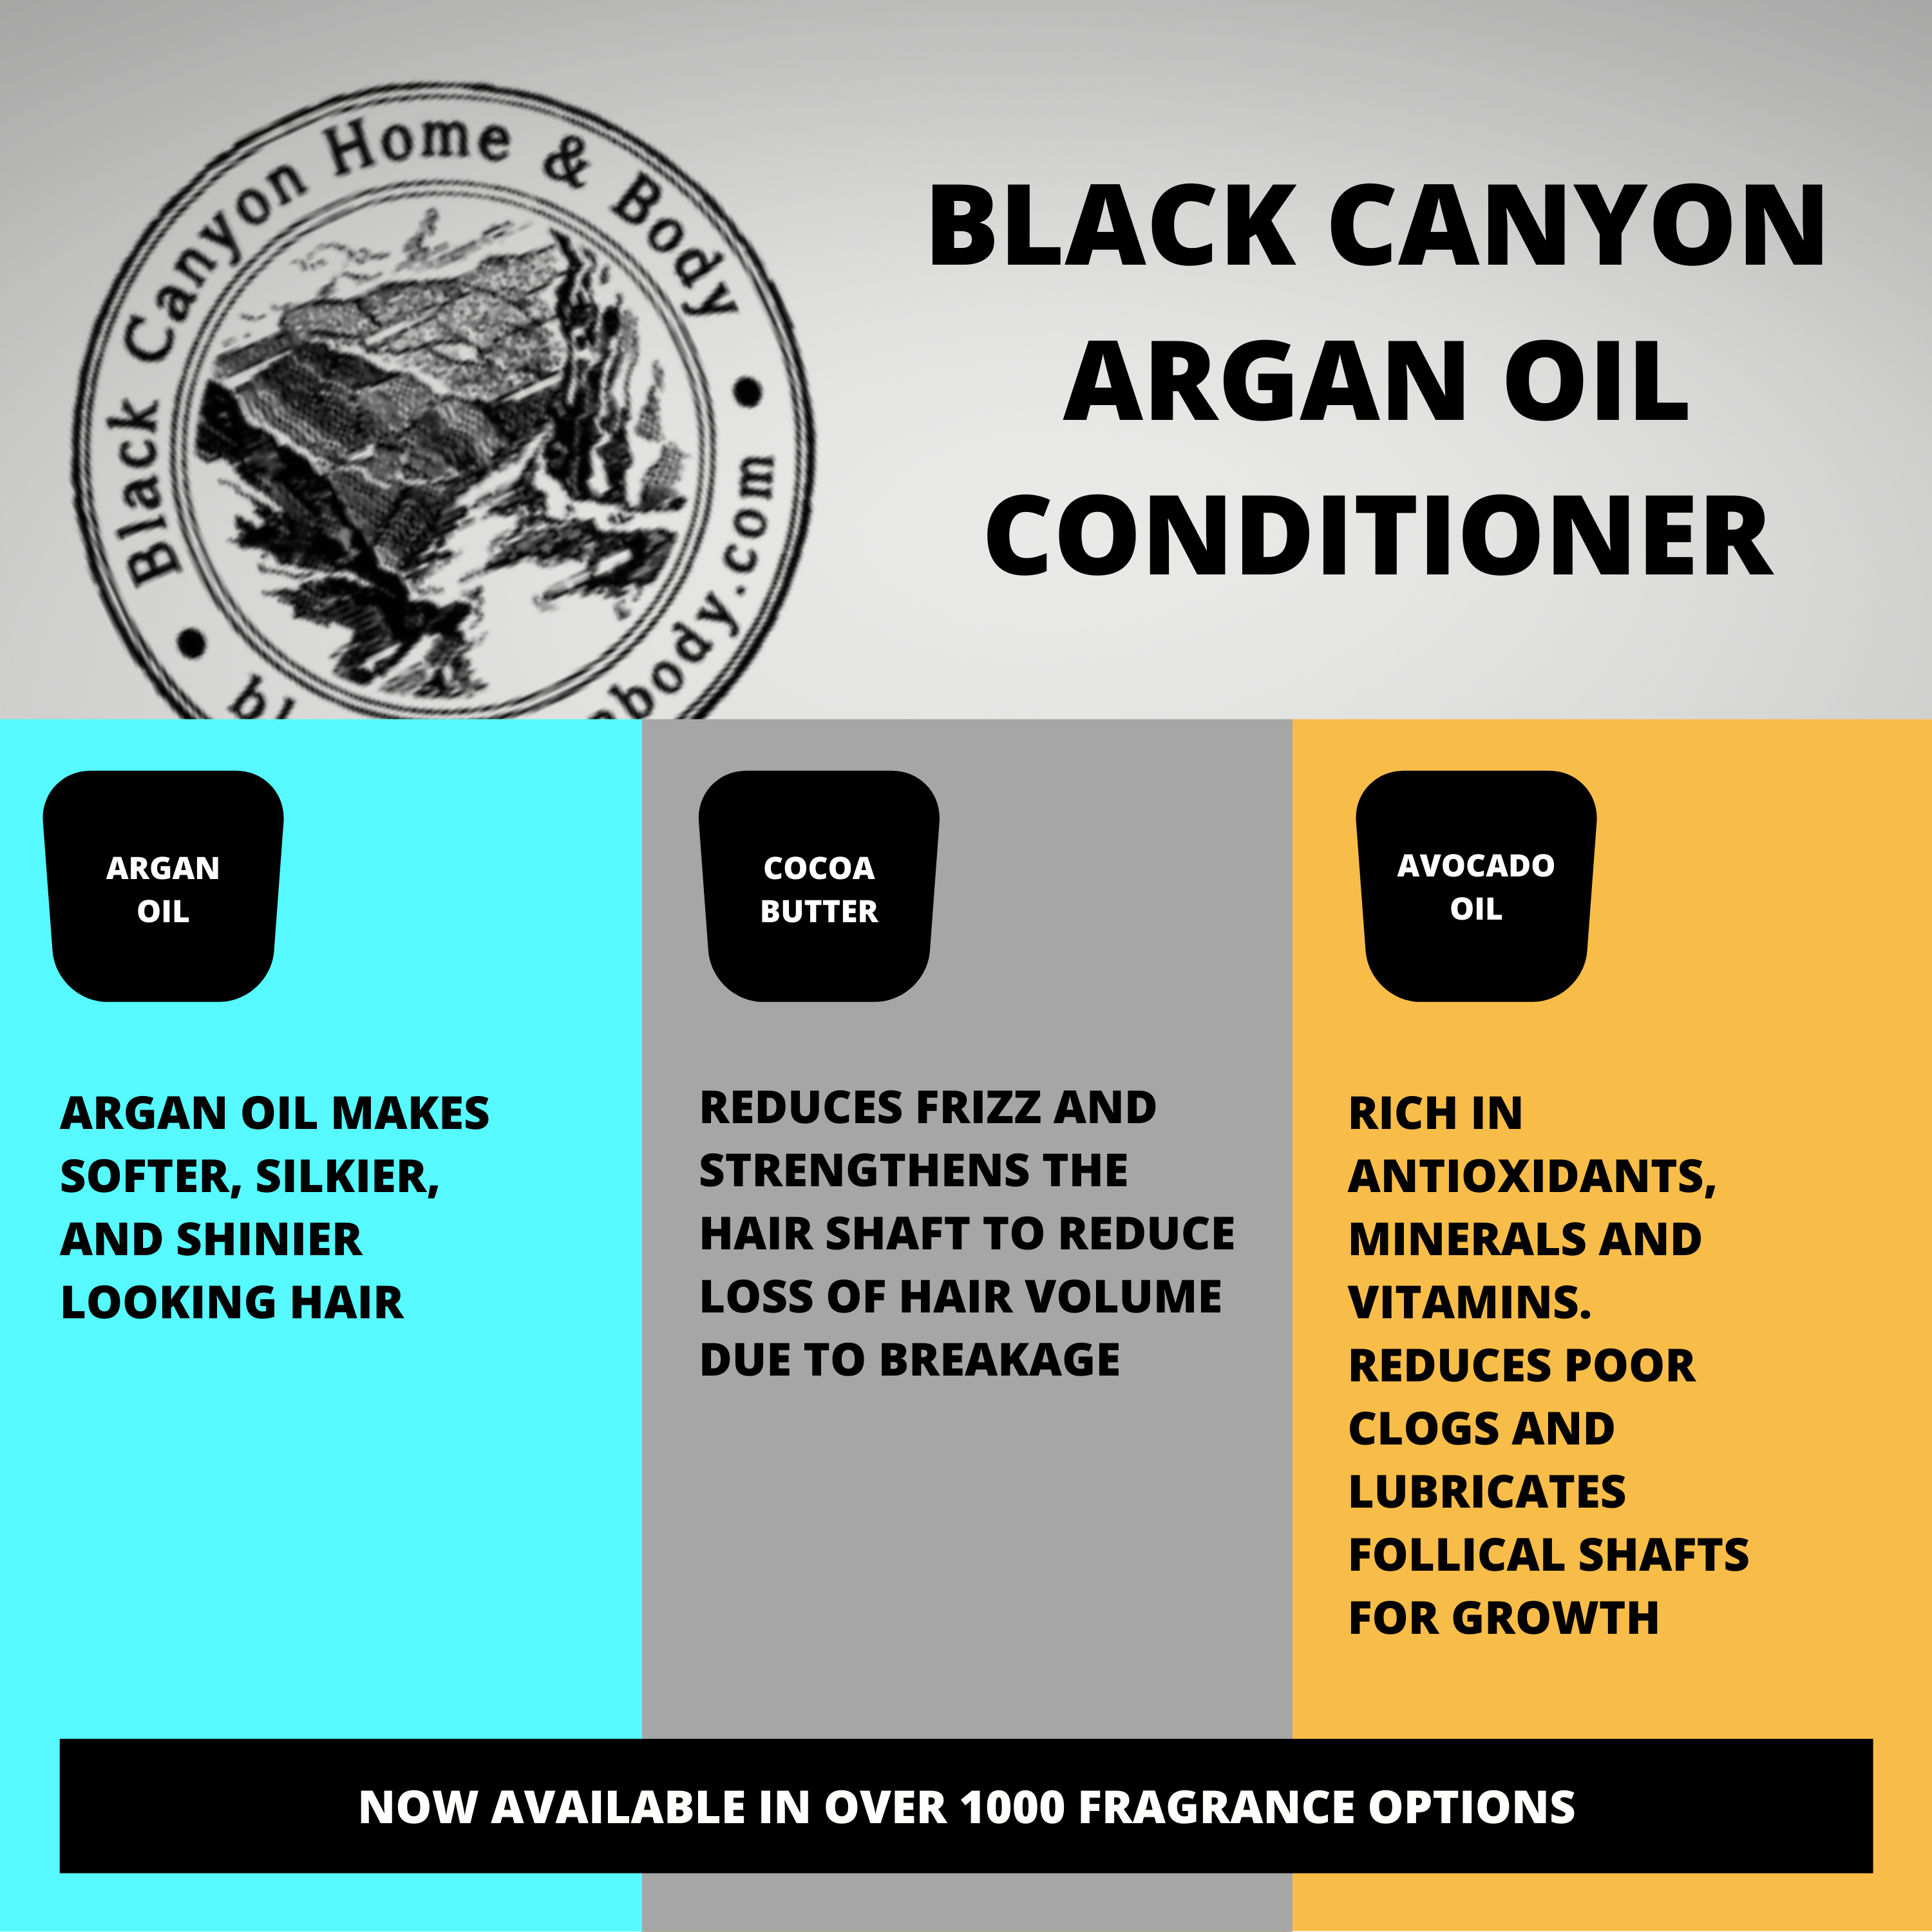 Black Canyon Black Currant & Sandalwood Scented Conditioner with Argan Oil